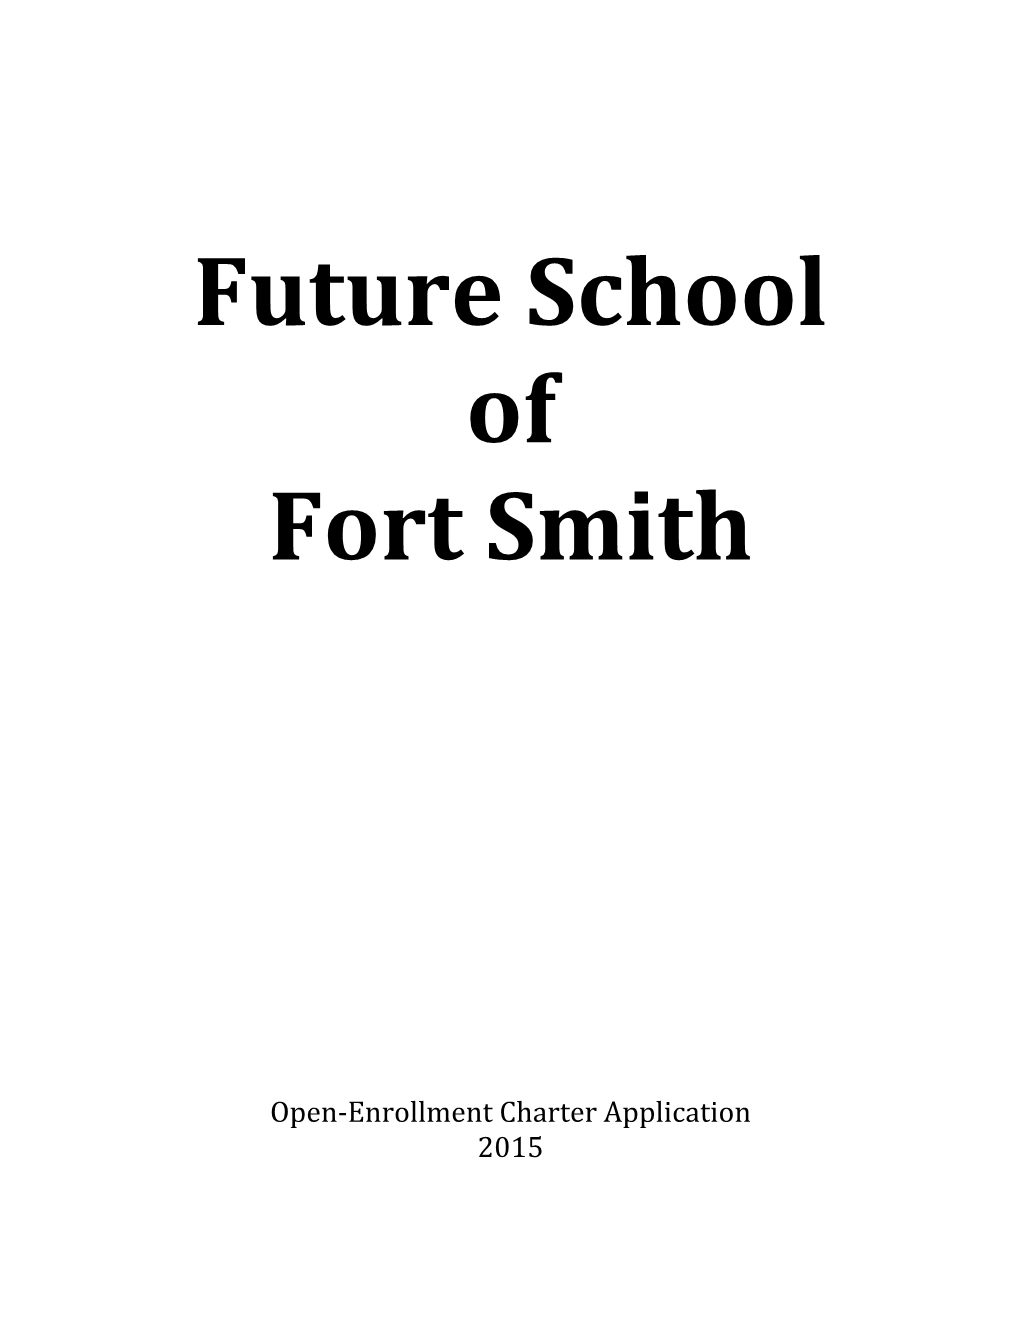 Future School of Fort Smith, Fort Smith